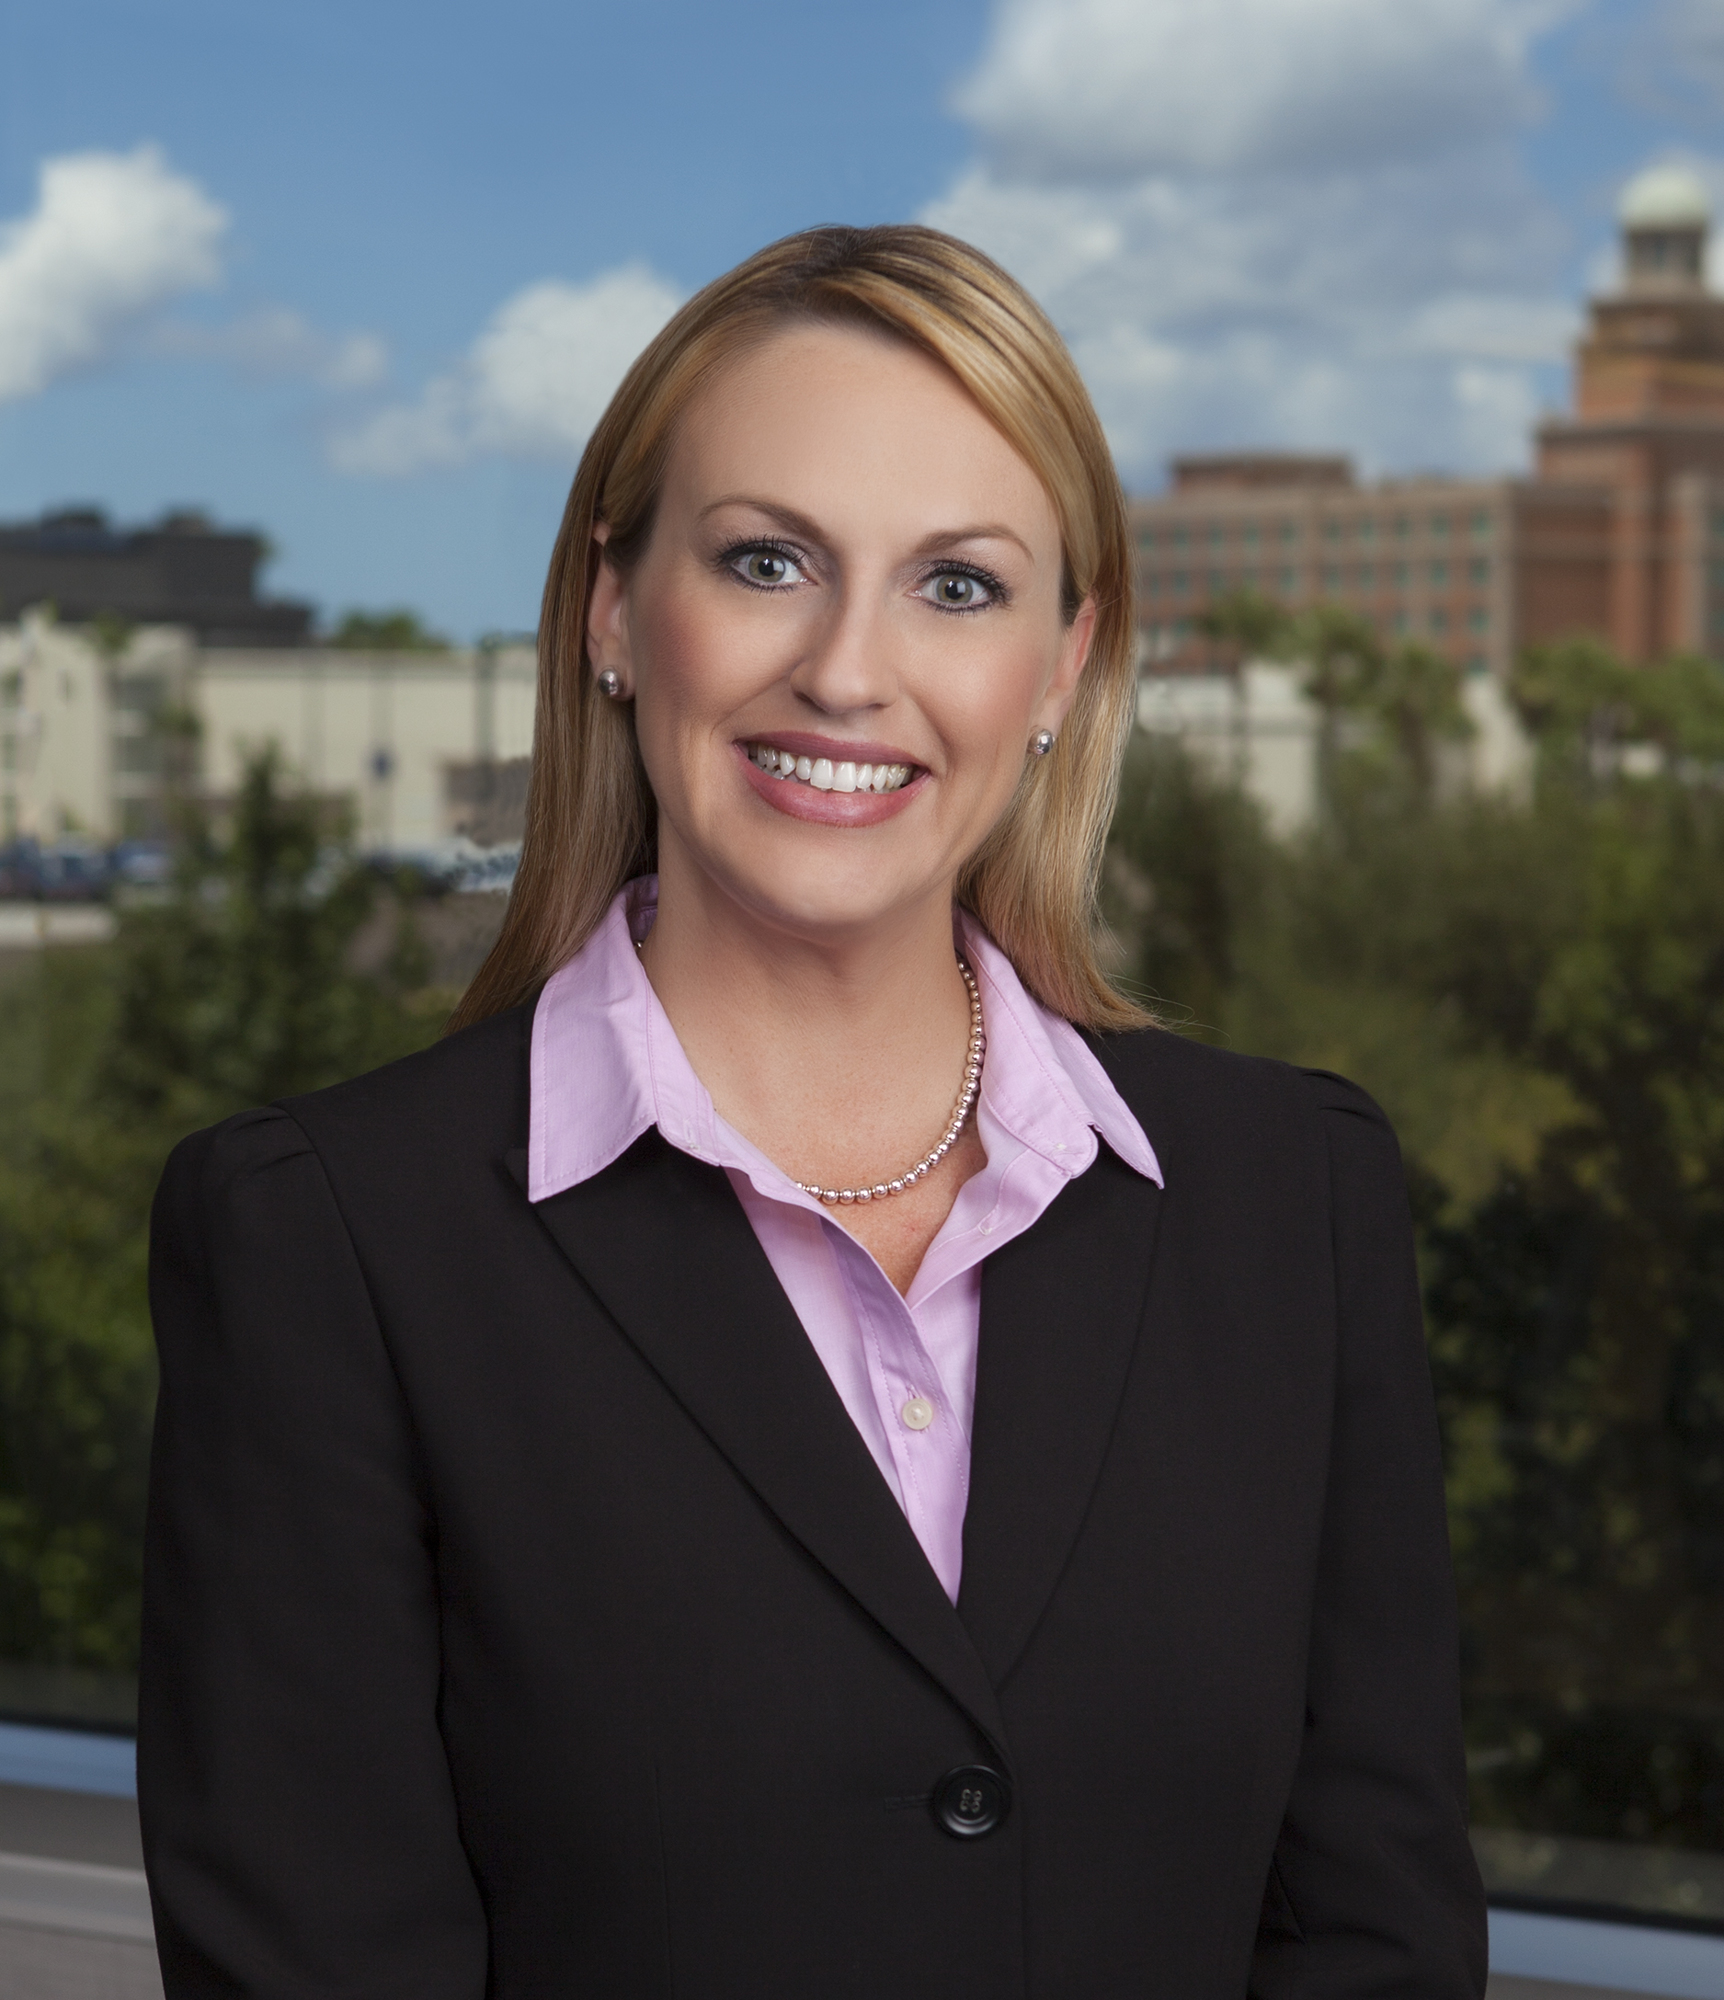 COURTESY — Amanda Buffinton, a partner at the Tampa law firm Shutts & Bowen and an attorney whose worked for more than 20 years in construction law,